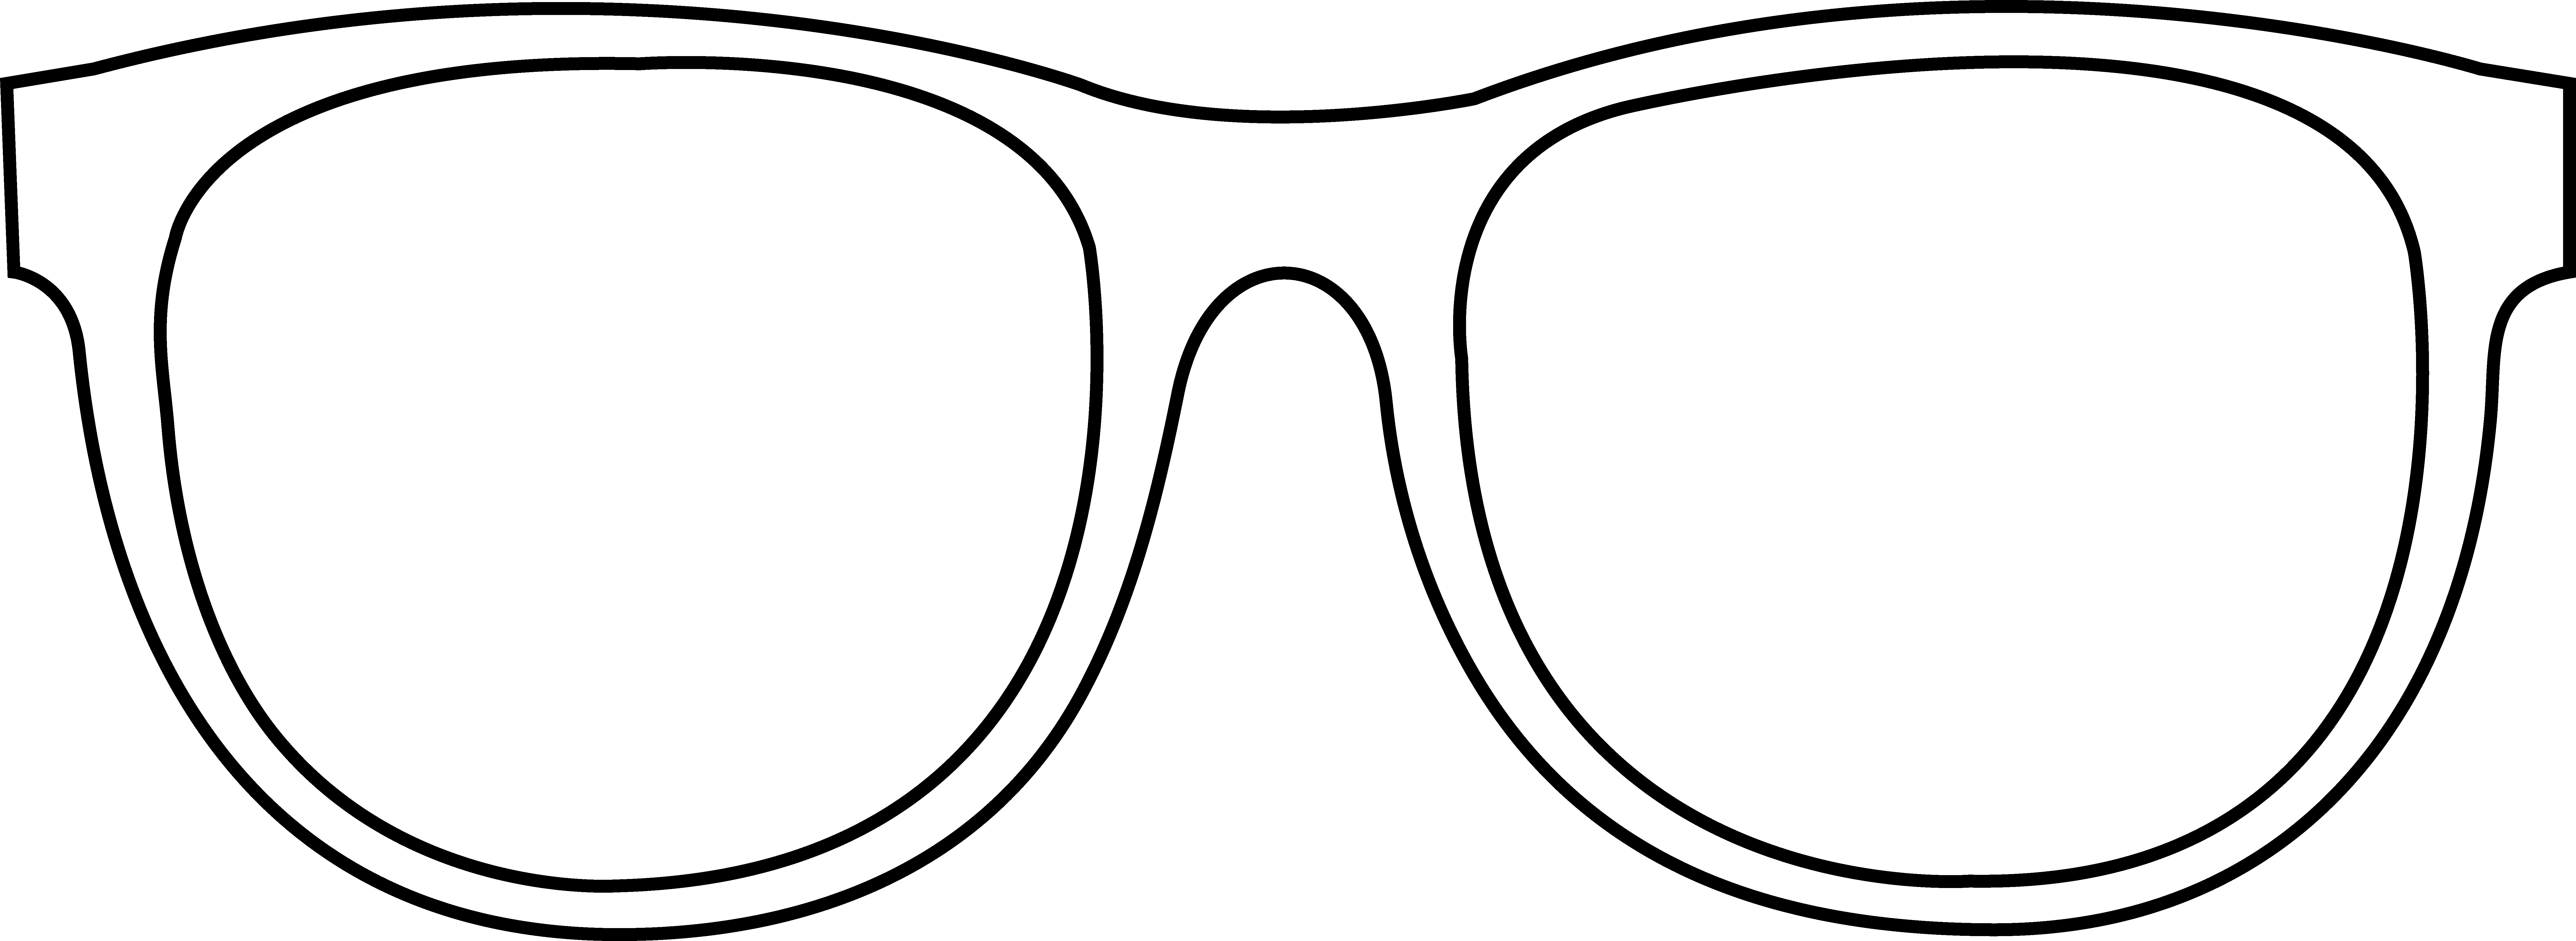 Glasses Clipart Black And White | Clipart library - Free Clipart Images